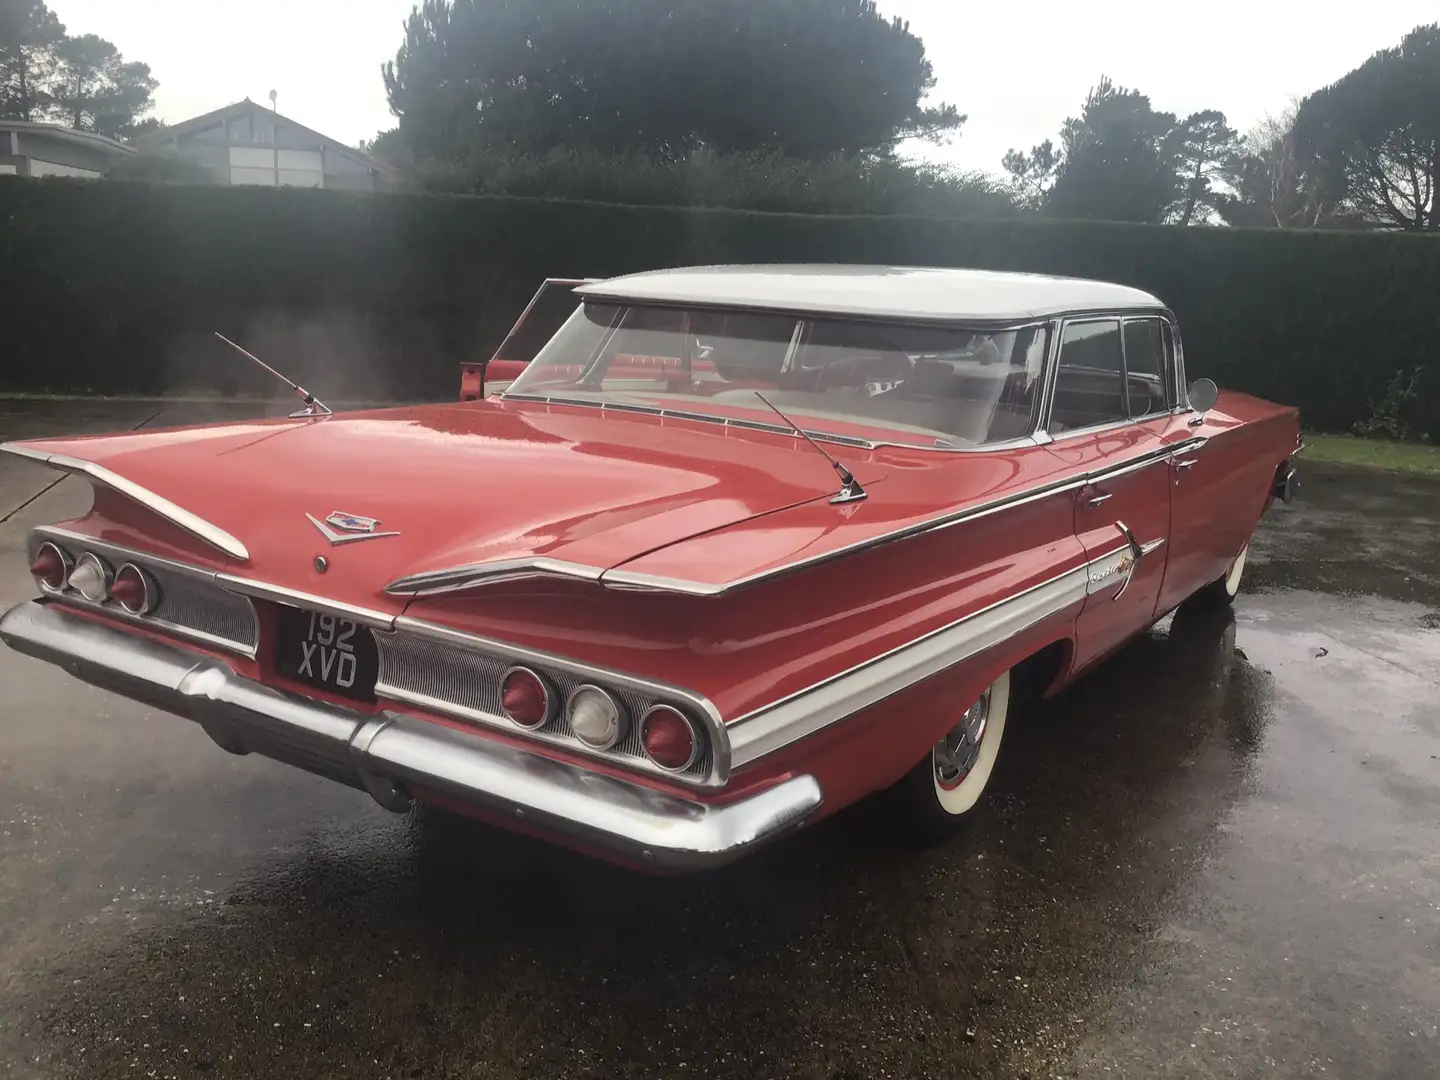 Chevrolet Impala automatic, power steering, working aircon, superb Rojo - 1